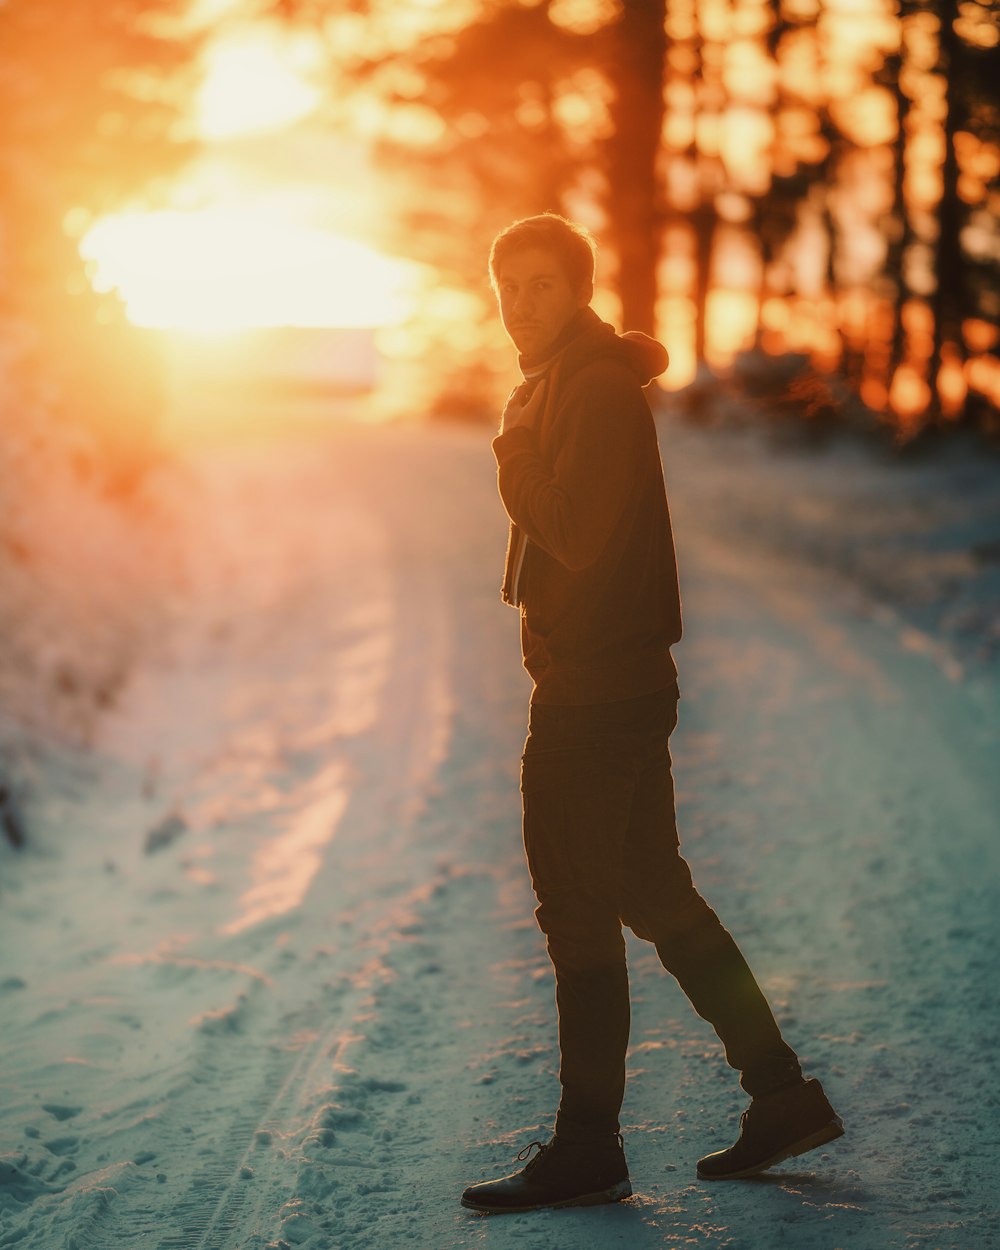 man in brown jacket standing on snow covered ground during daytime